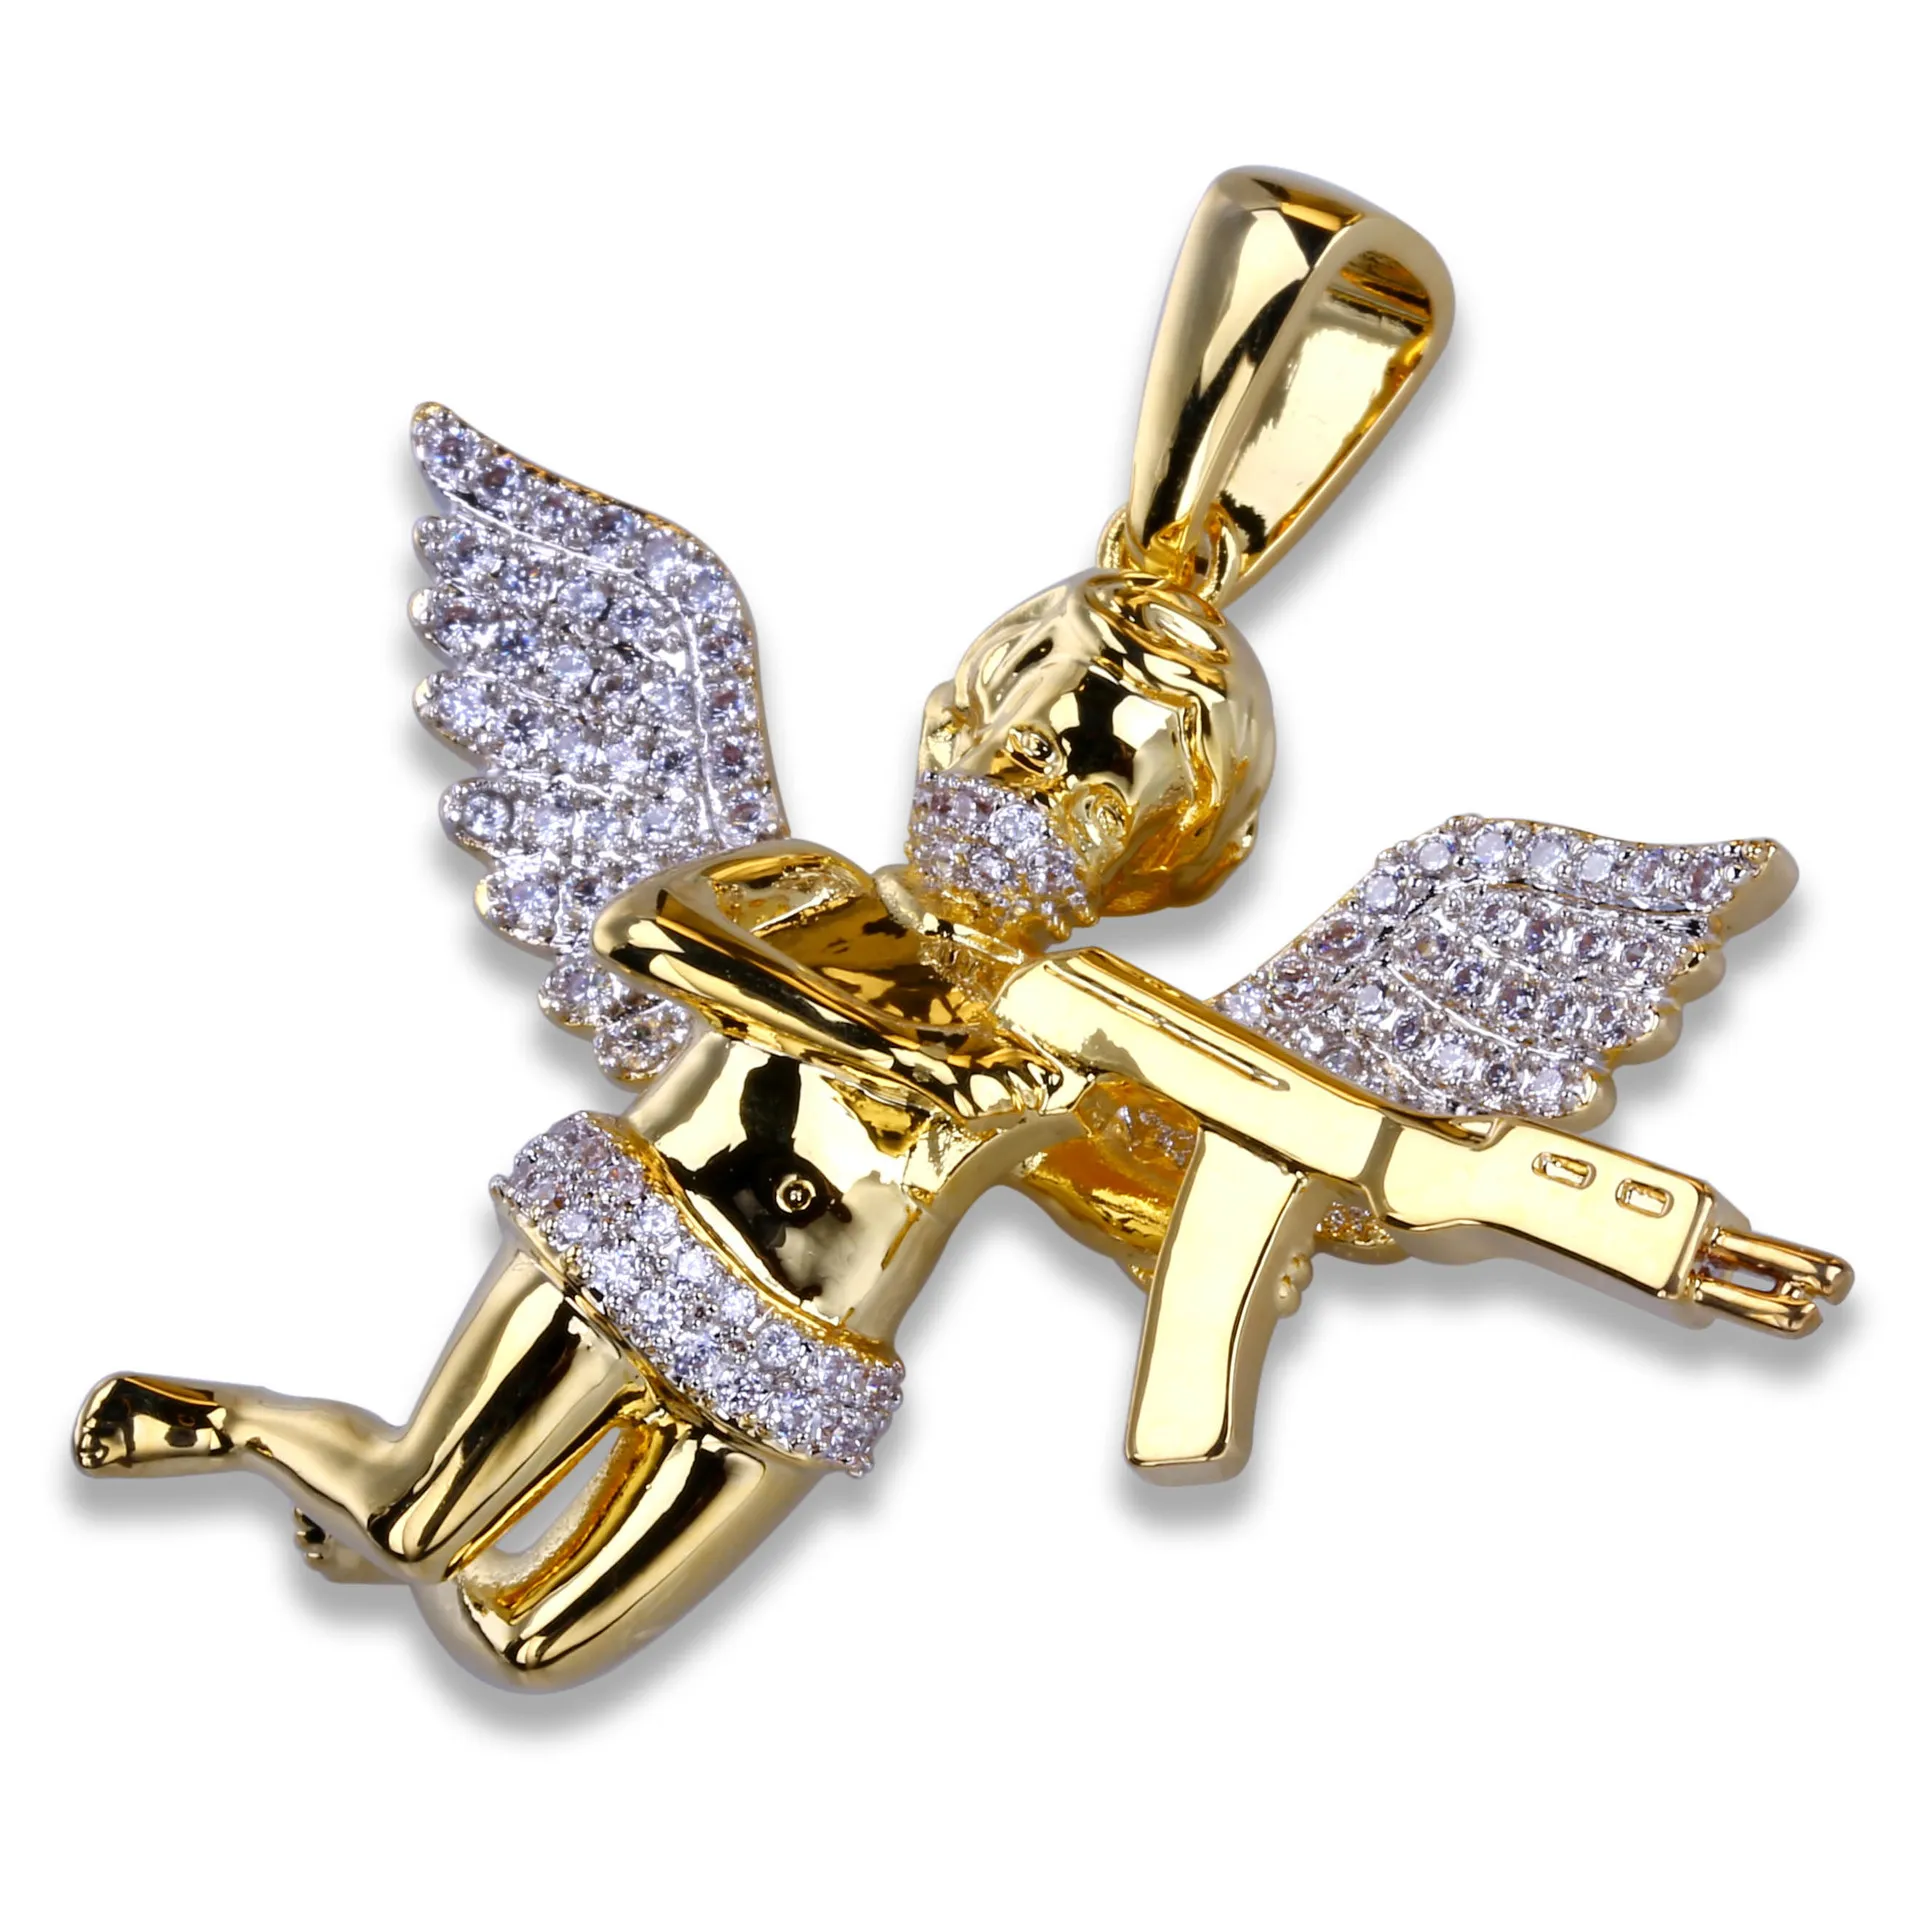 Men Full Iced Rhinestone Necklaces Auniquestyle Cupid Angel Pendant Hip Hop Cuban Chain Necklace Gold Jewelry For Male Micro Pave225E